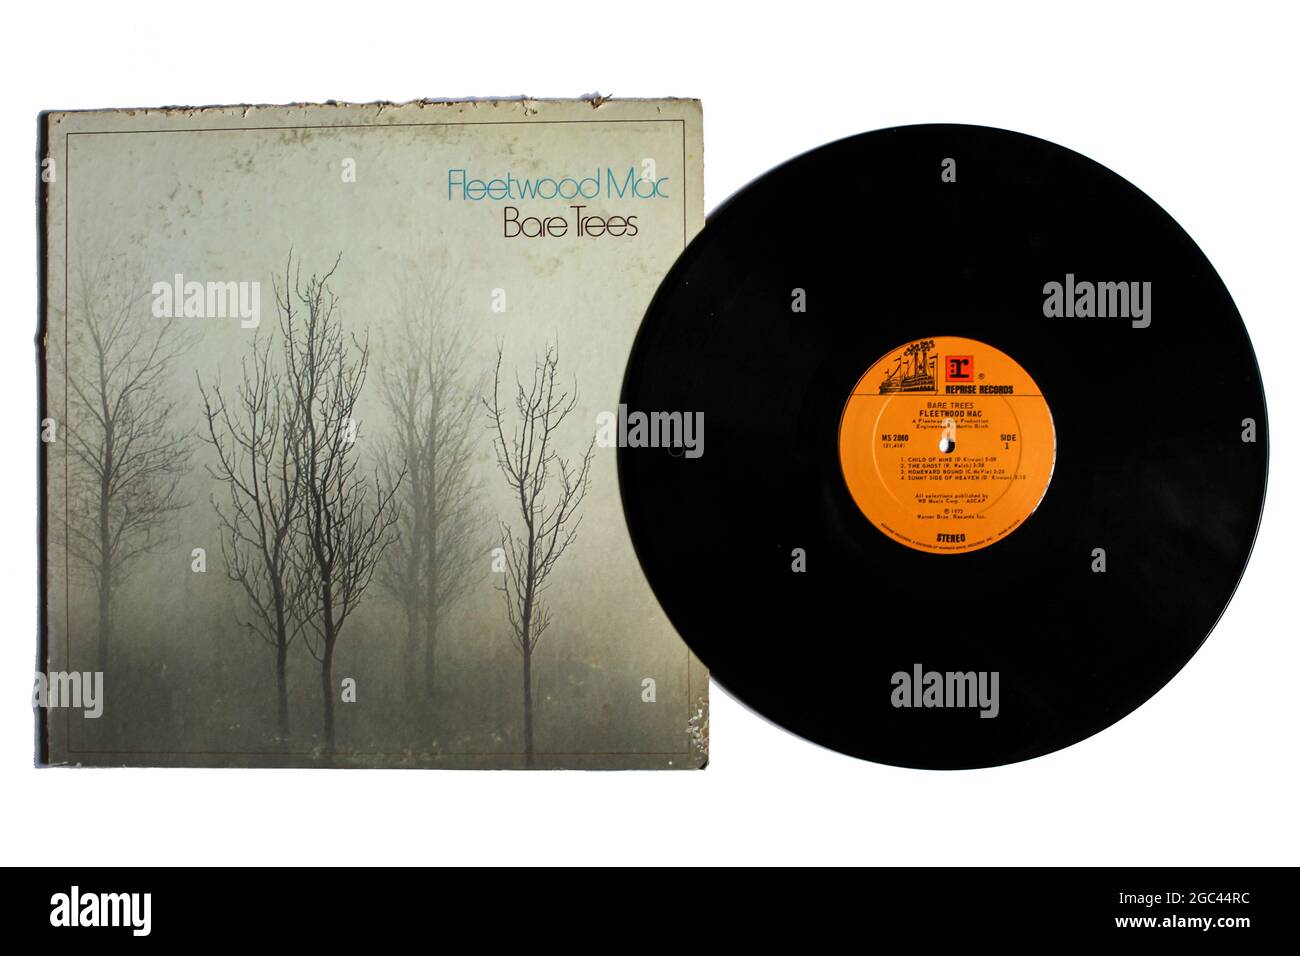 Rock and soft rock band, Fleetwood Mac music album on vinyl record LP disc. Titled: Bare Trees album cover Stock Photo